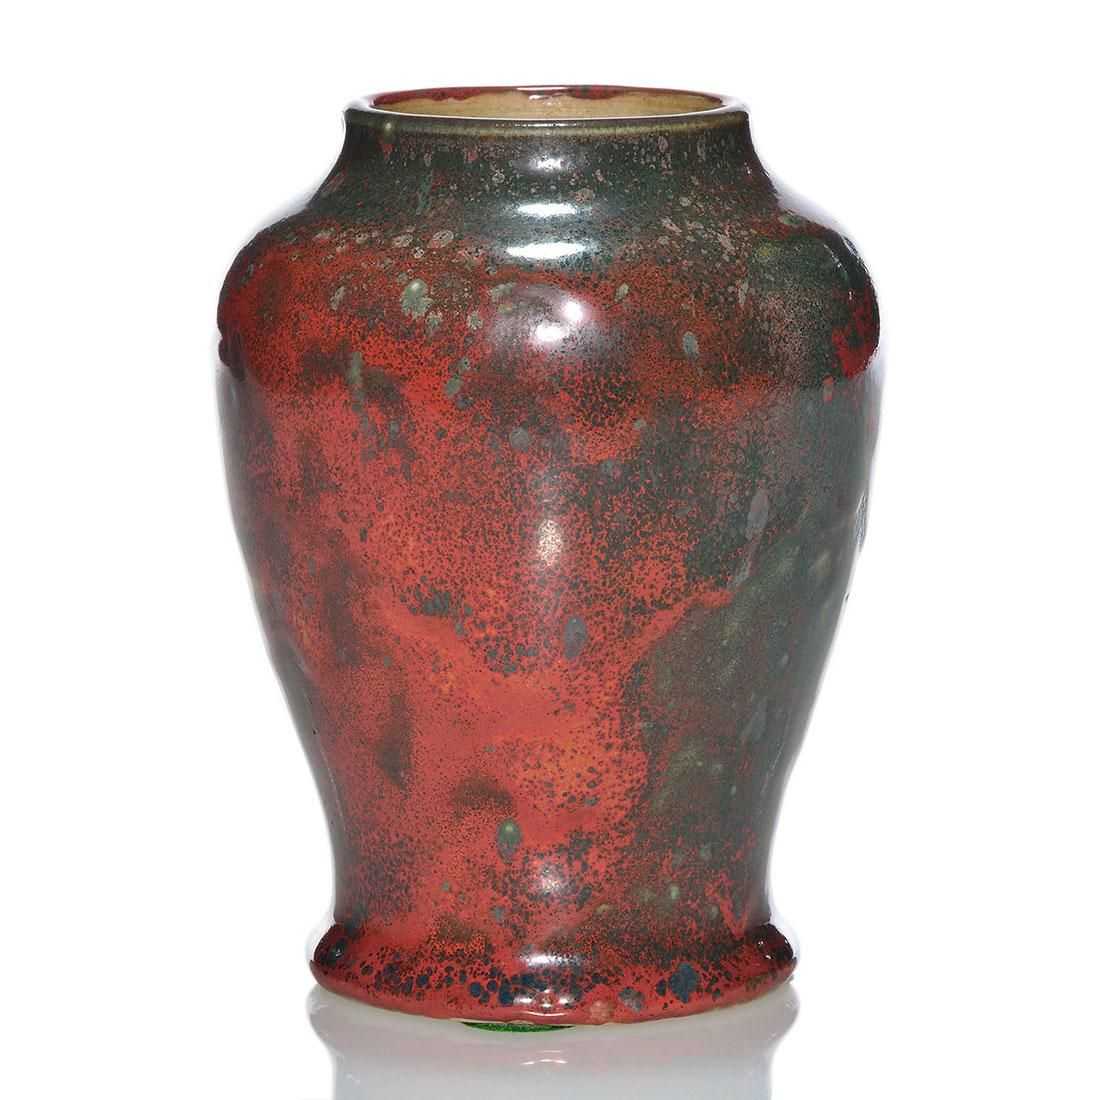 This Dedham Pottery oxblood vase, standing just 5⅜in tall, earned $2,400 plus the buyer’s premium in June 2018. Image courtesy of Humler & Nolan and LiveAuctioneers.